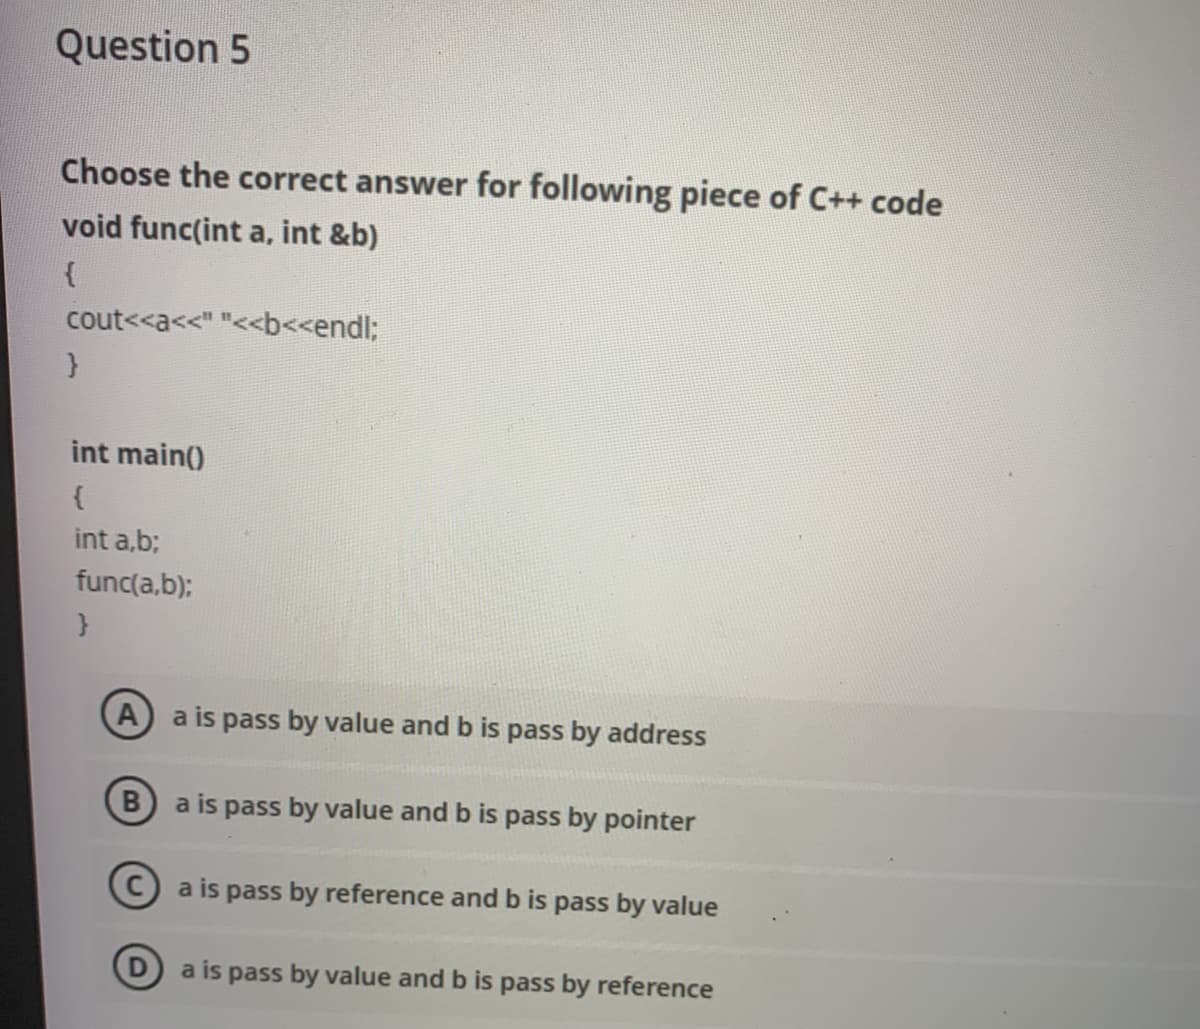 Question 5
Choose the correct answer for following piece of C++ code
void func(int a, int &b)
cout<<a<<" "<<b<<endl;
int main()
{
int a,b;
func(a,b);
A) a is pass by value and b is pass by address
a is pass by value and b is pass by pointer
C)a is pass by reference and b is pass by value
a is pass by value and b is pass by reference
